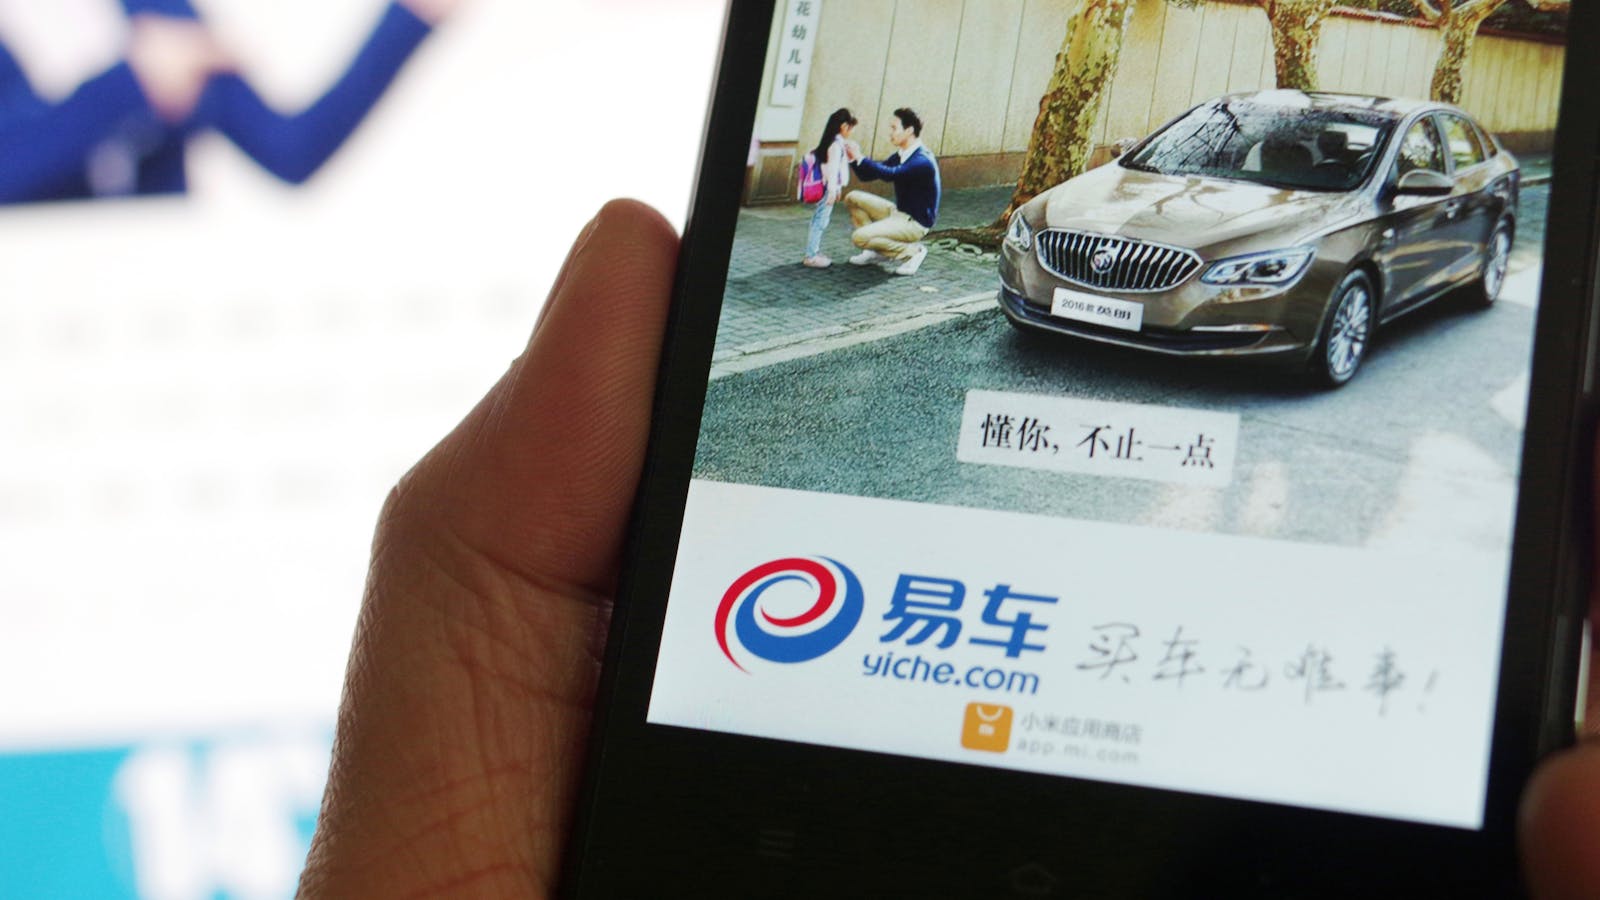 A smartphone app for Chinese auto information website Yiche.com, formerly called Bitauto.com, whose parent company is a big shareholder in Yixin. Photo by AP.  